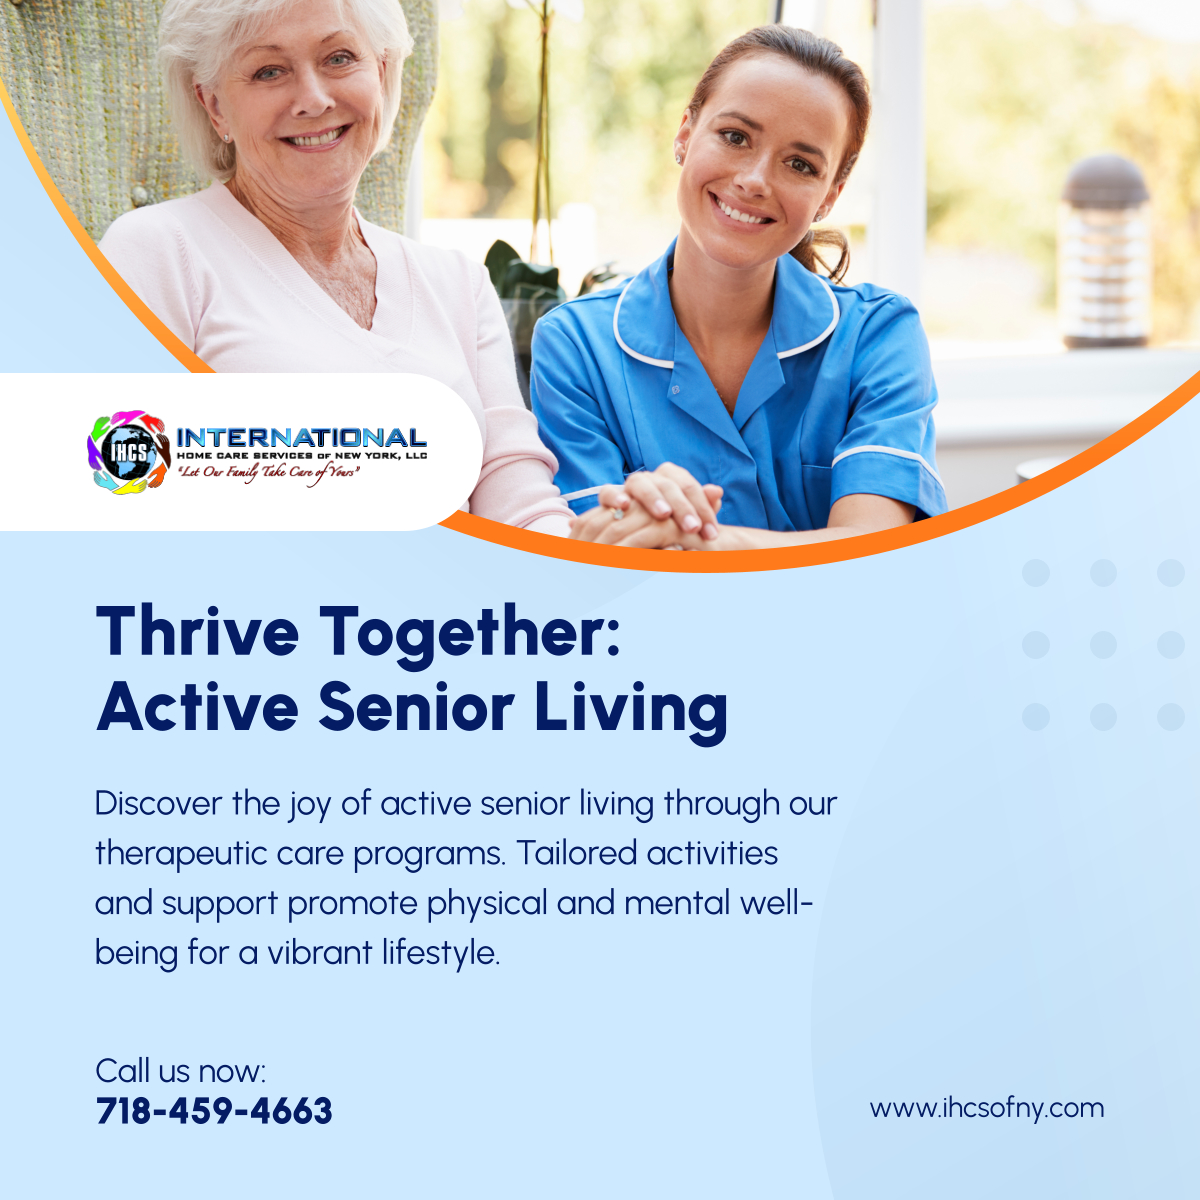 Embrace an active senior lifestyle with our therapeutic care programs. Elevate well-being and joy through personalized activities. Connect with us at info@ihcsofny.com or call 718-459-4663. Visit 97-77 Queens Boulevard, Rego Park, New York 11374.

#HomeCareServices #ActiveSeniors